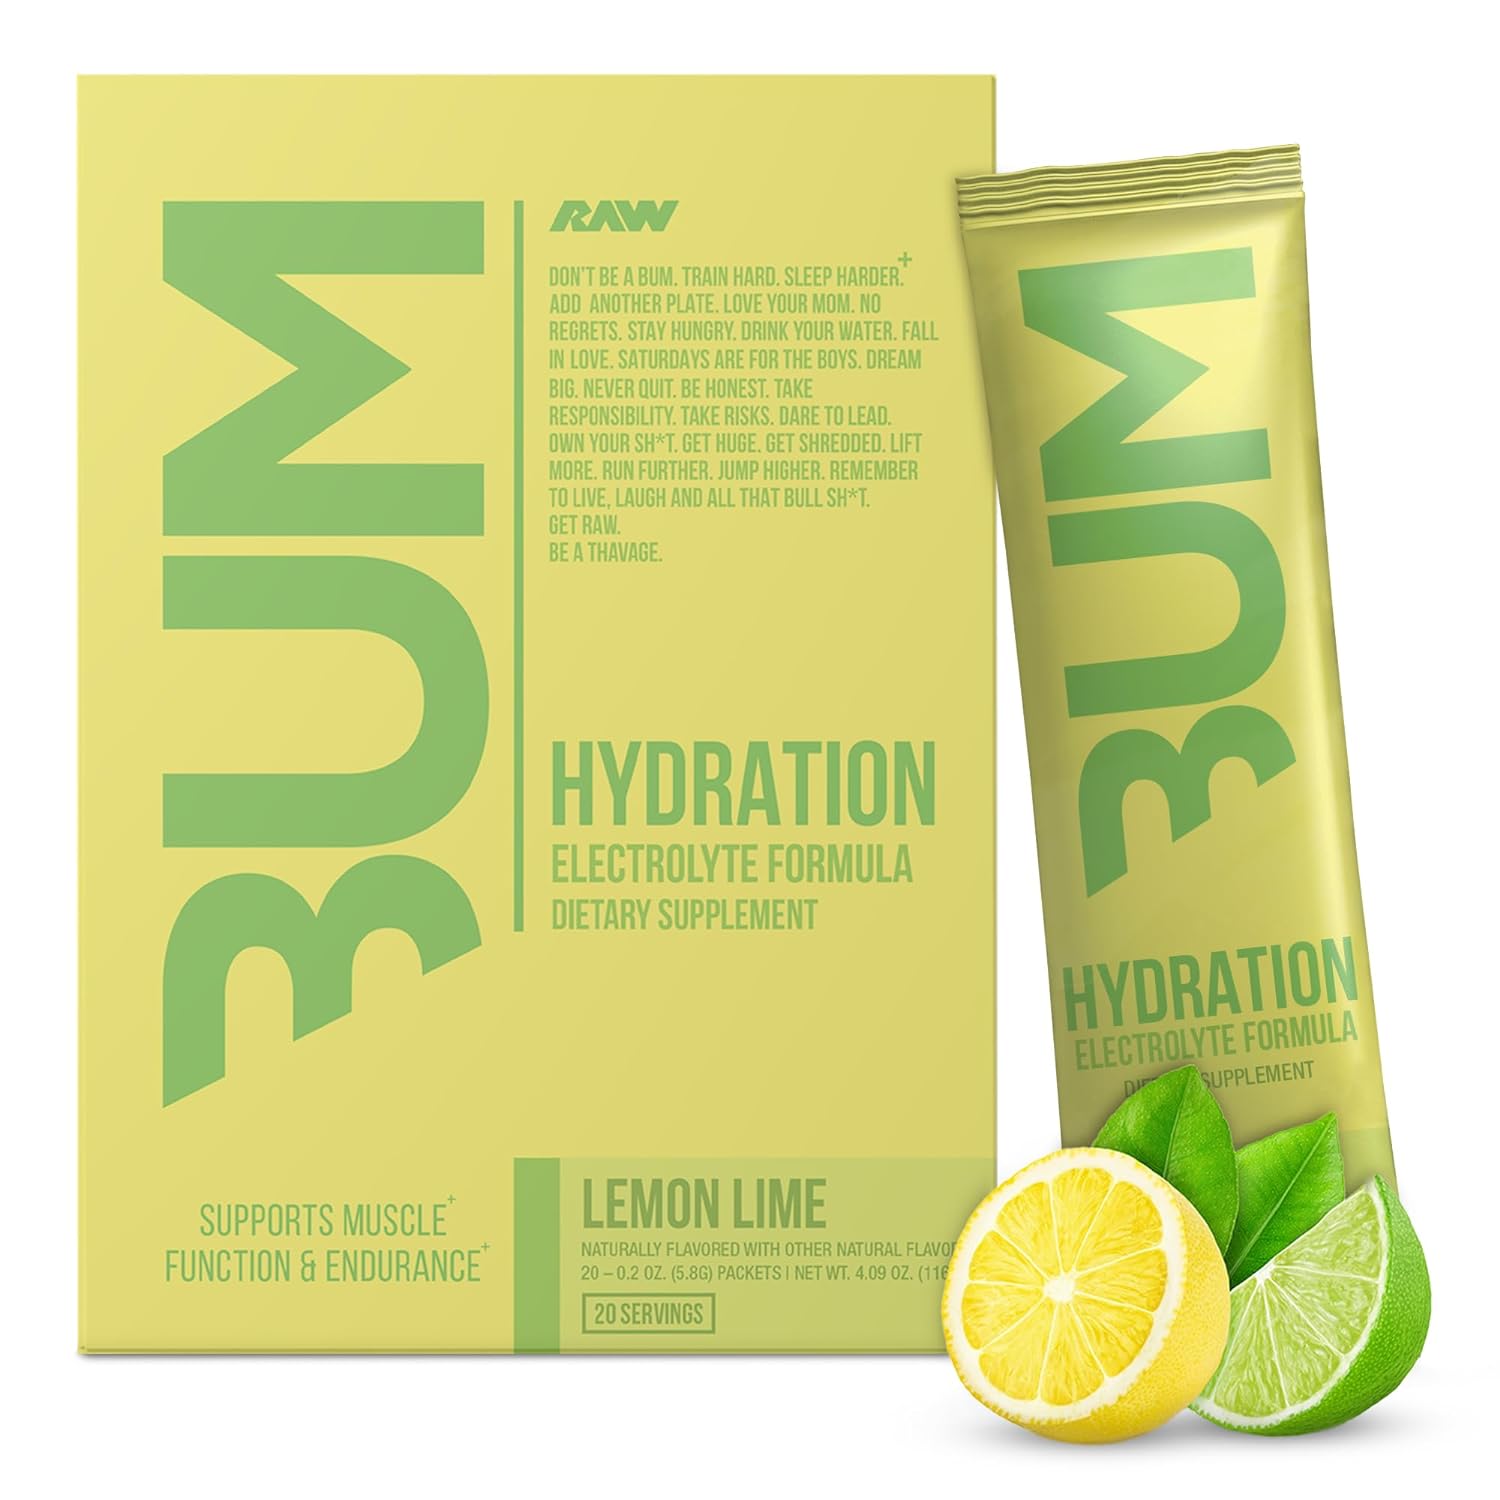 RAW Electrolytes Powder Hydration Drink Mix Packets, BUM Hydrate (Lemon Lime, 20 Servings) - Electrolyte Hydration Packets Supports Muscle Function & Endurance - Keto Free Electrolytes Powder Packets